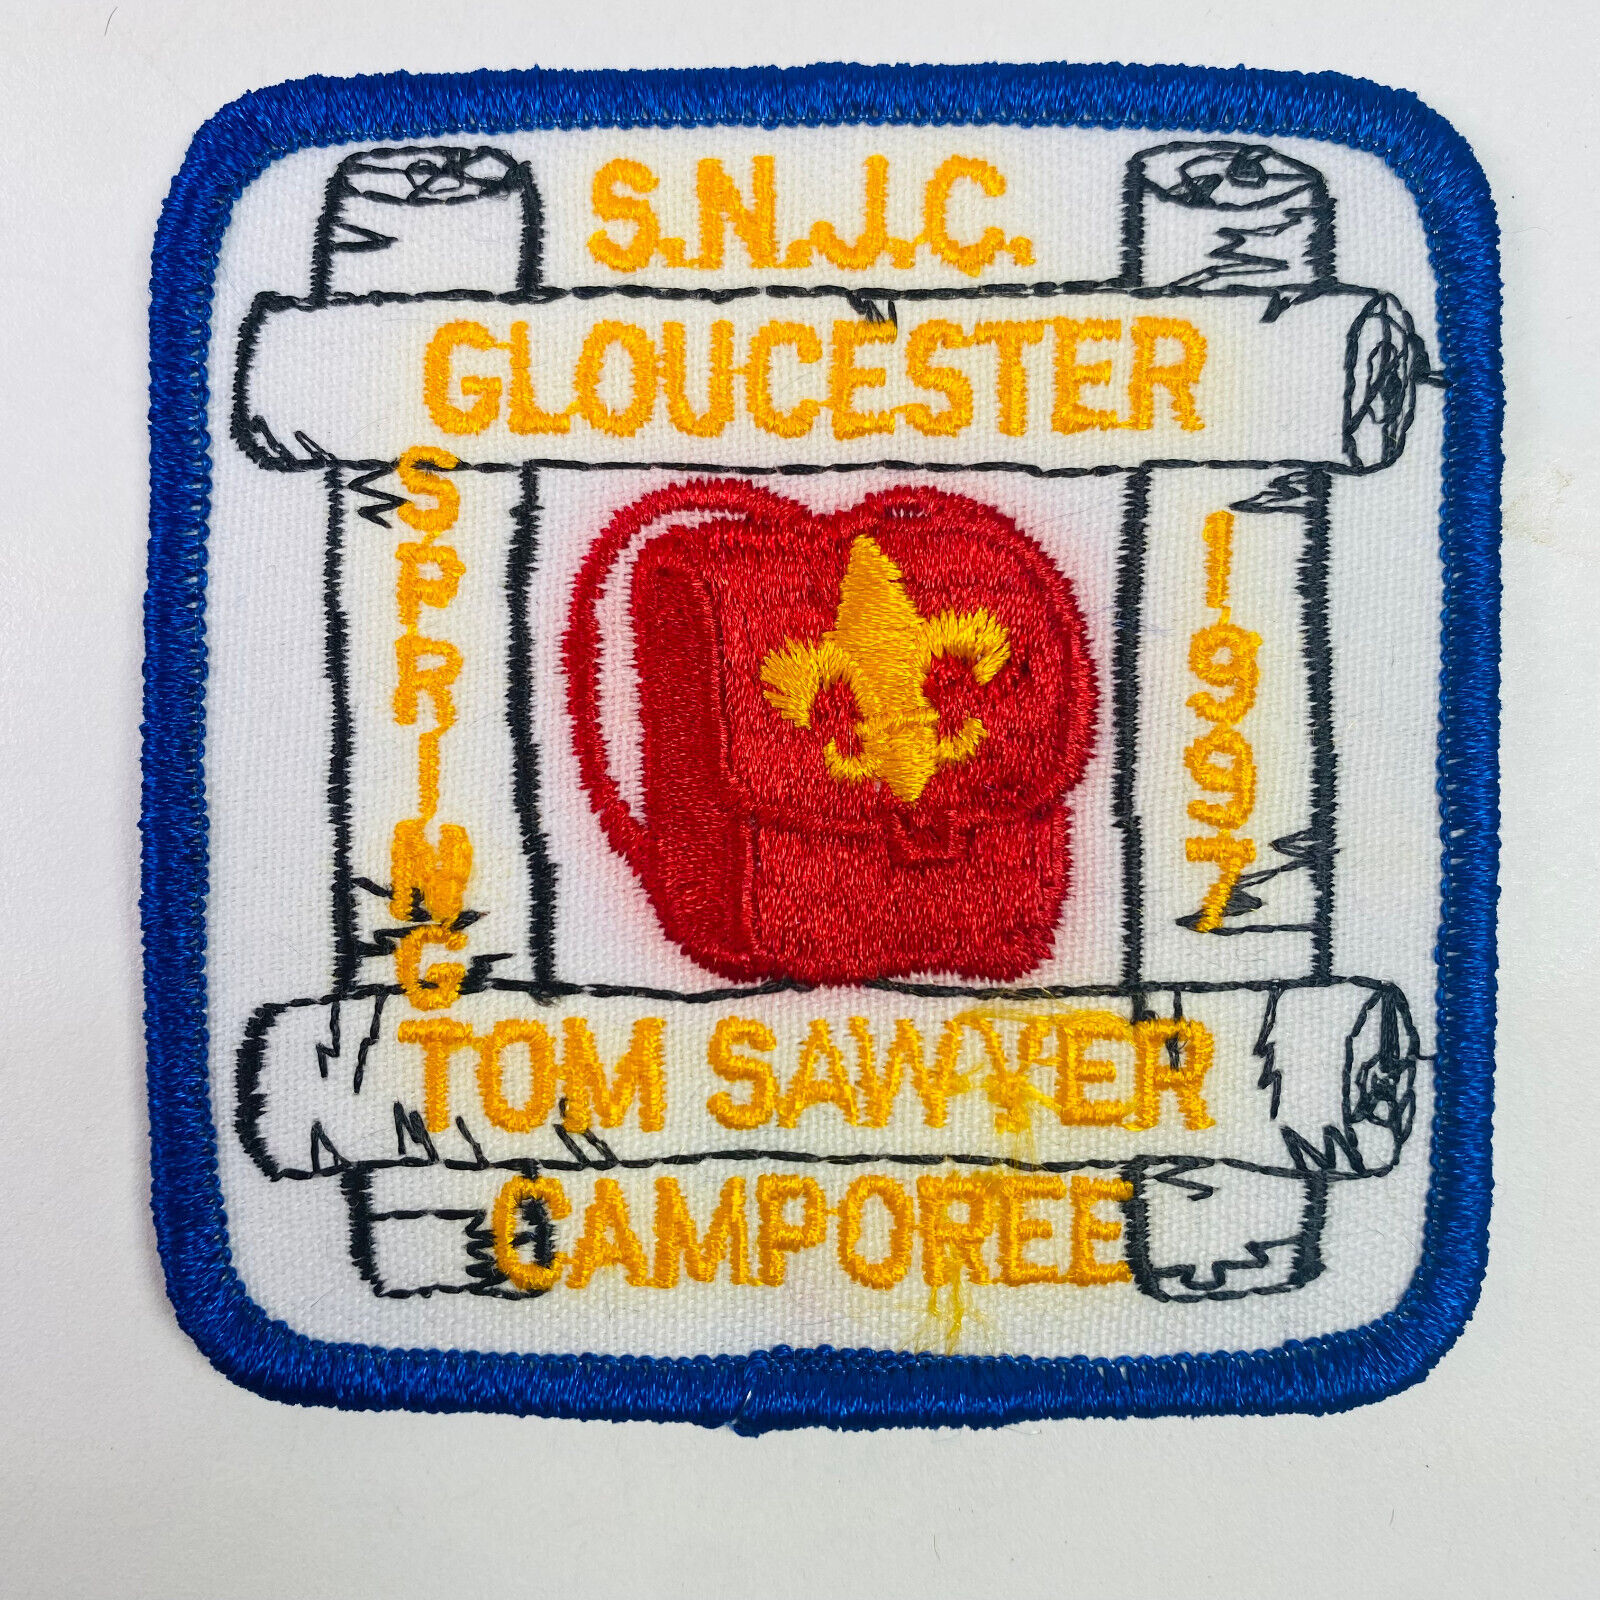 1997 Spring Camporee Sawyer Gloucester District New Jersey Boy Scouts Patch F6